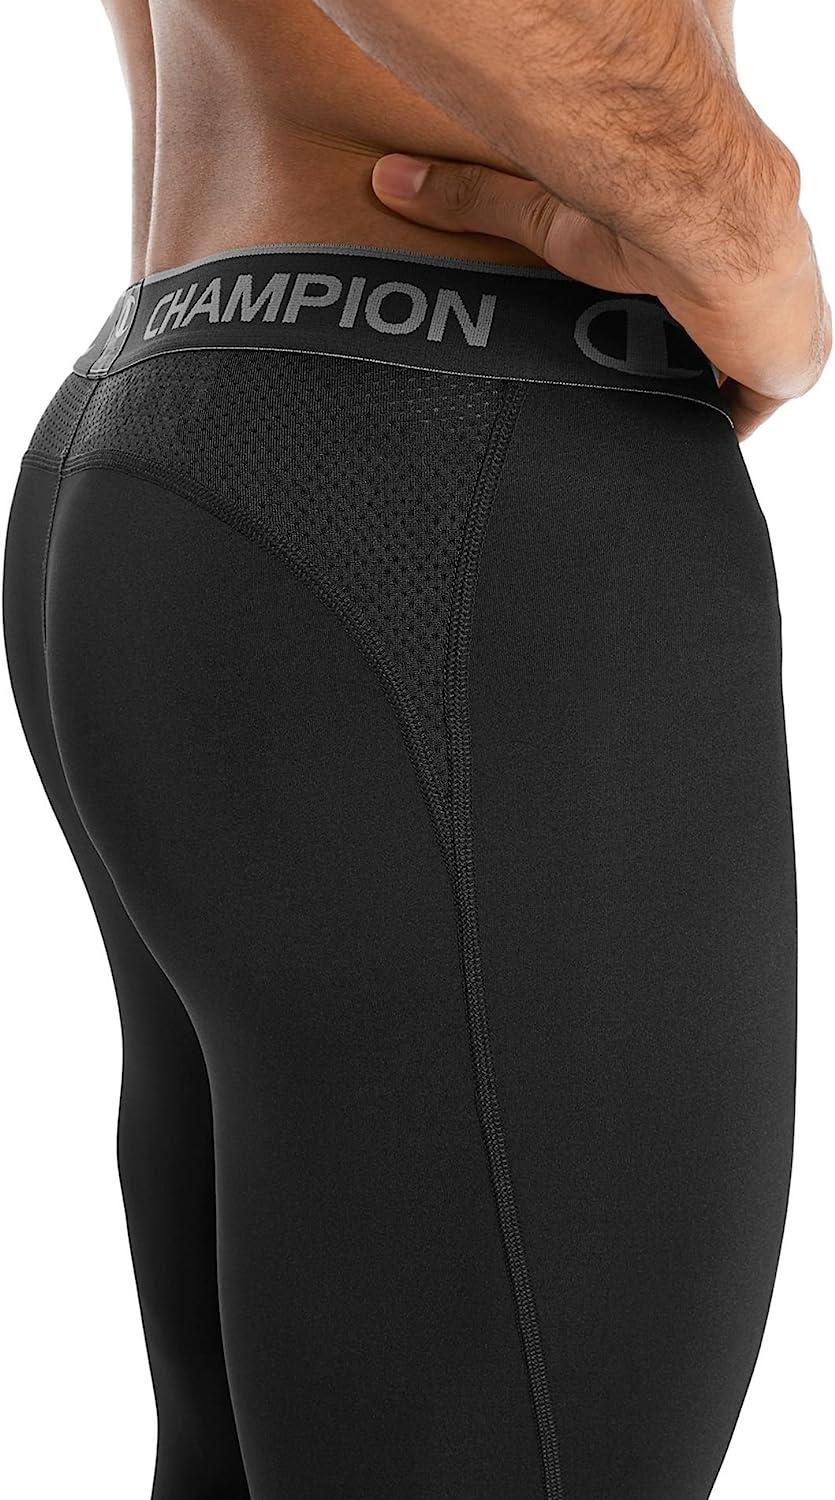 Men's Athletic Tights & Performance Shorts